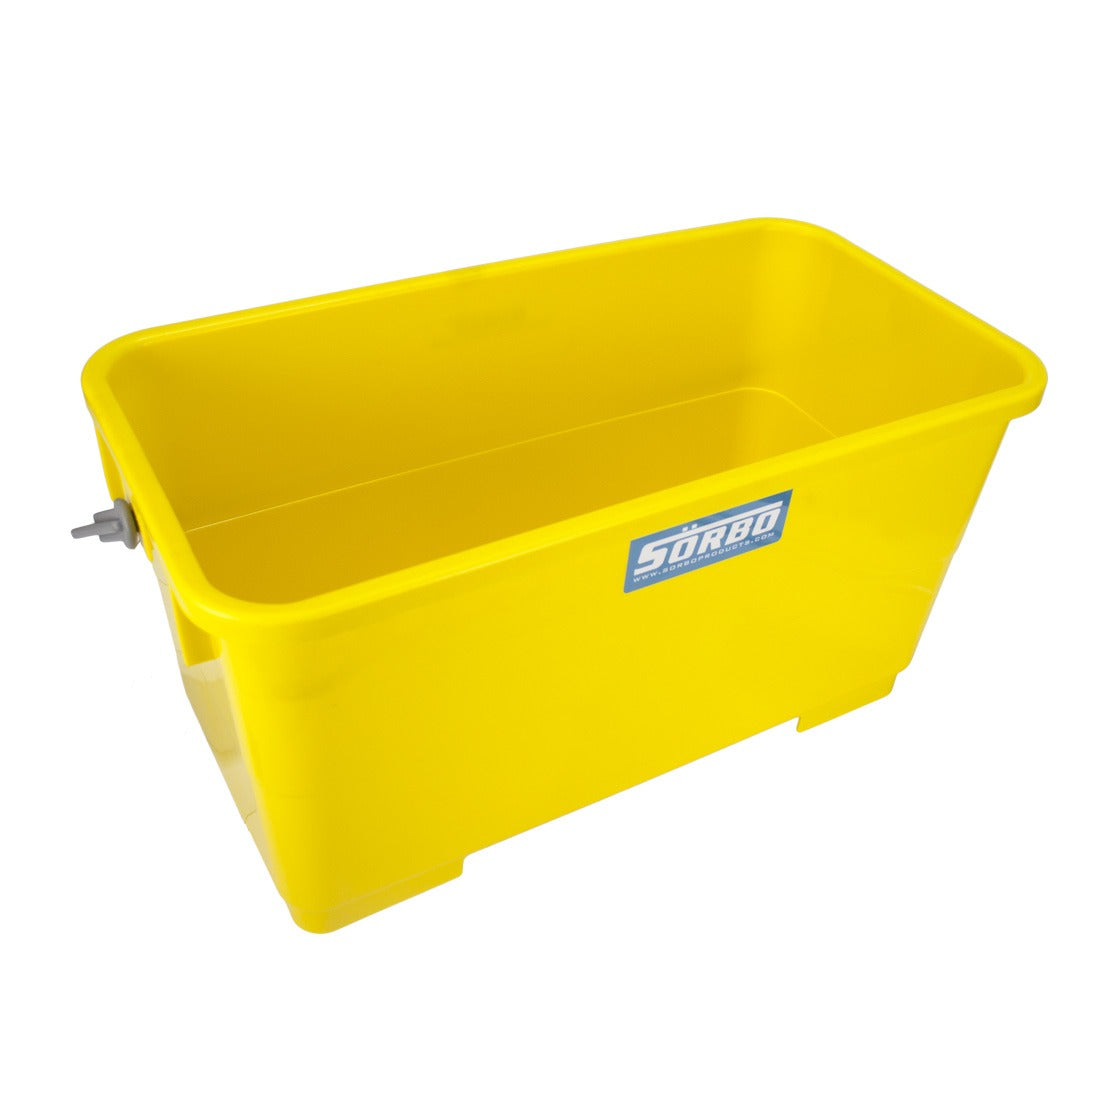 Sörbo Bucket with Clips for Squeegee and Washer for Leif Cart - 18 Inch - Oblique Top View